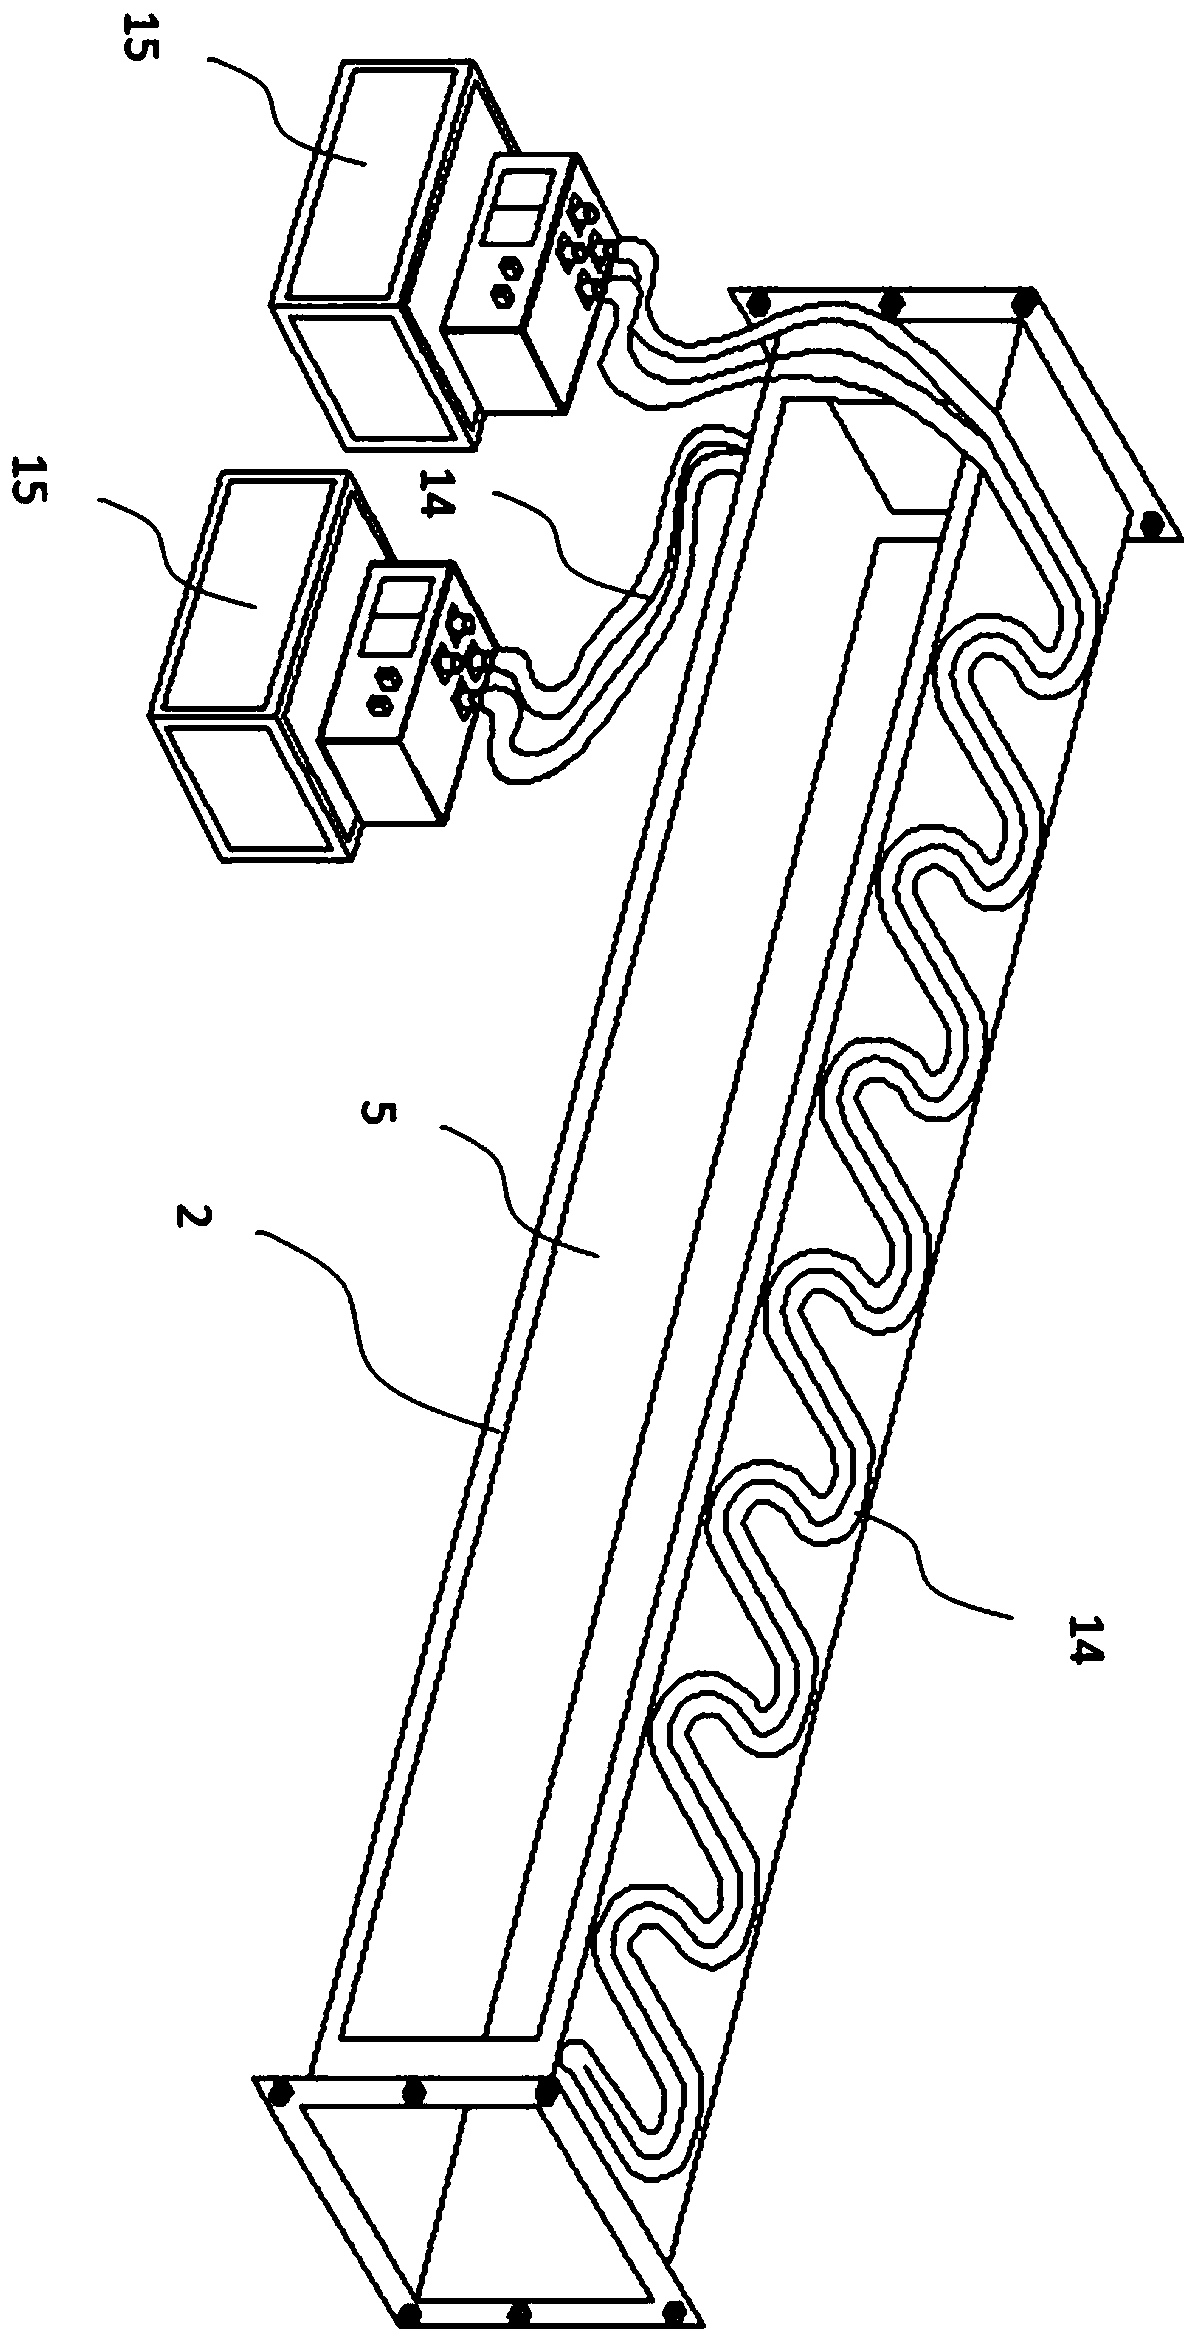 Adjacent continuous tunnel group ventilation experiment device and manufacture method